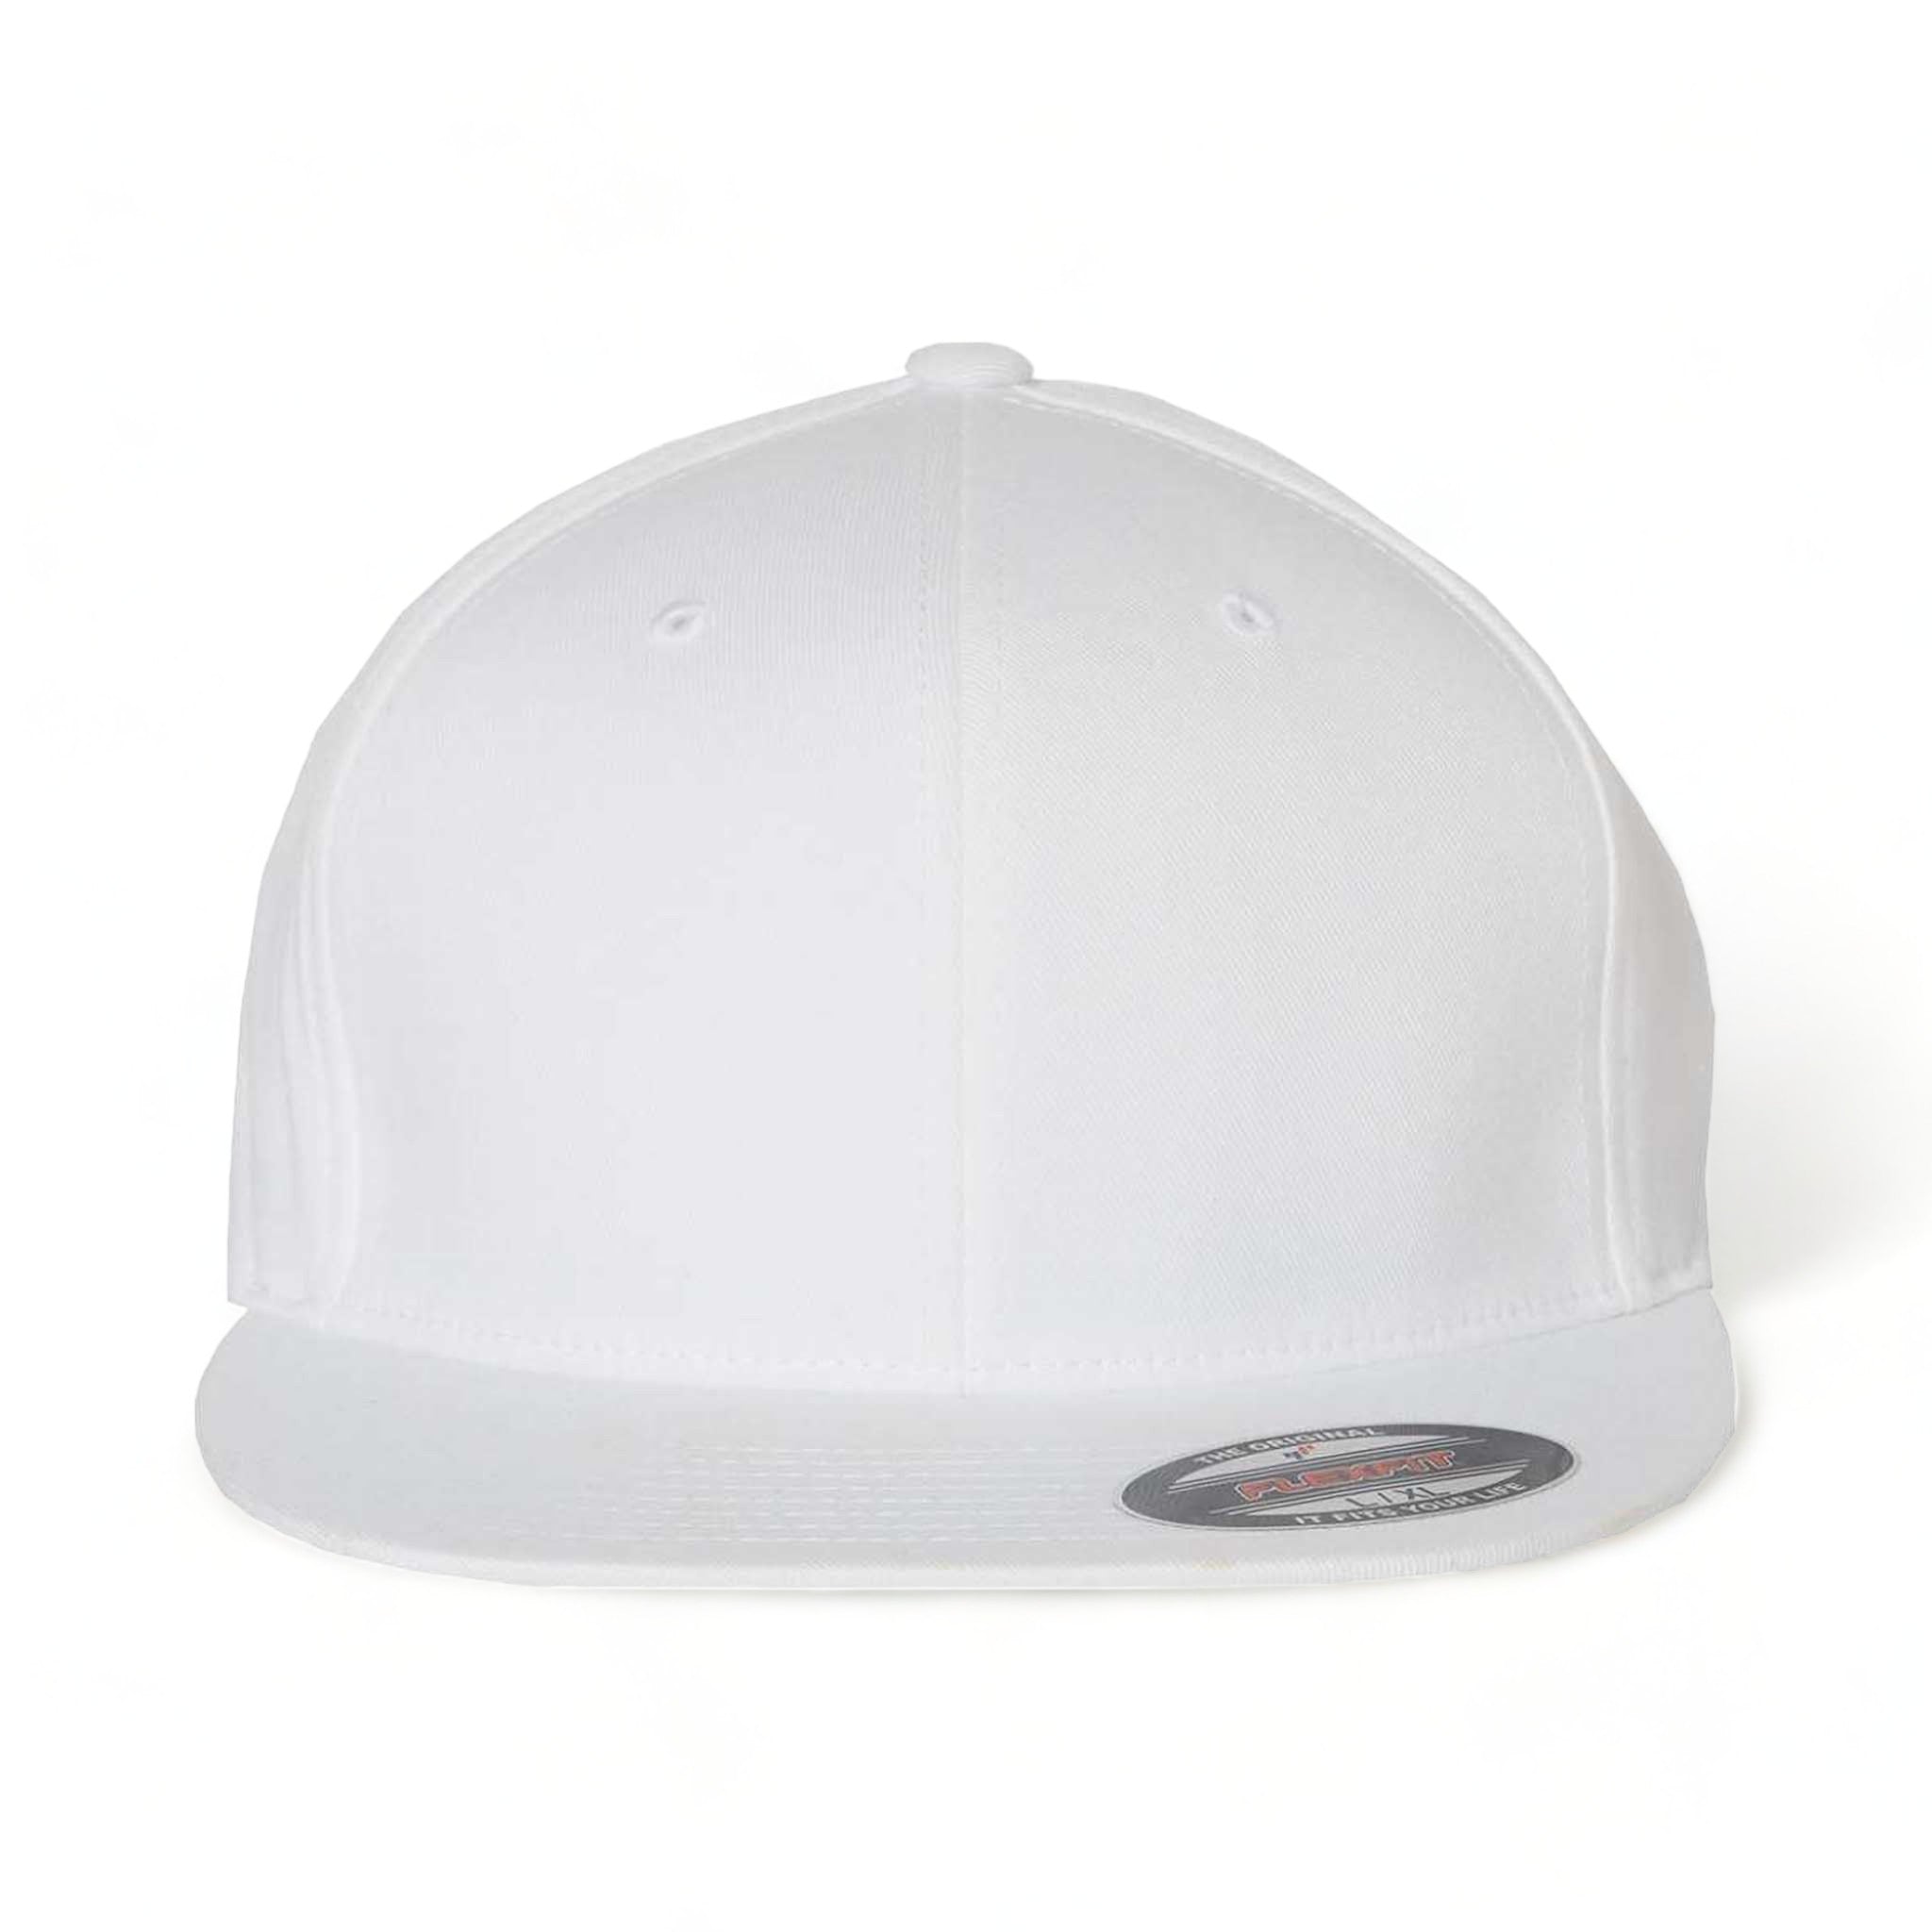 Front view of Flexfit 6297f custom hat in white